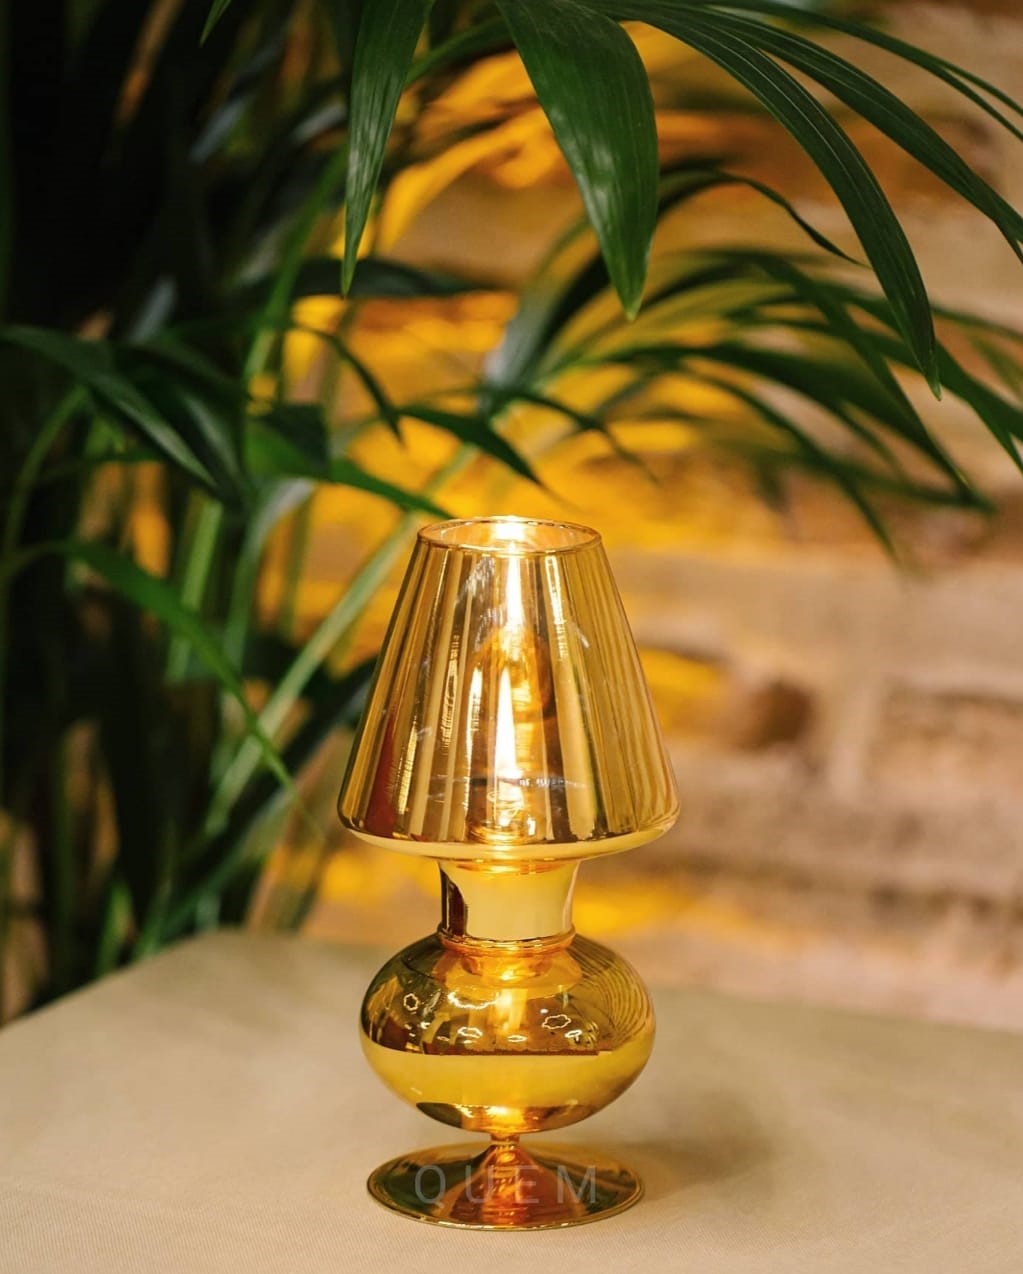 Quem Gold Oil Lamp, Modern Glass Decor with Glass Wick, Decorative Candles for Home and Office. Table Centerpiece Decoration Lamp.